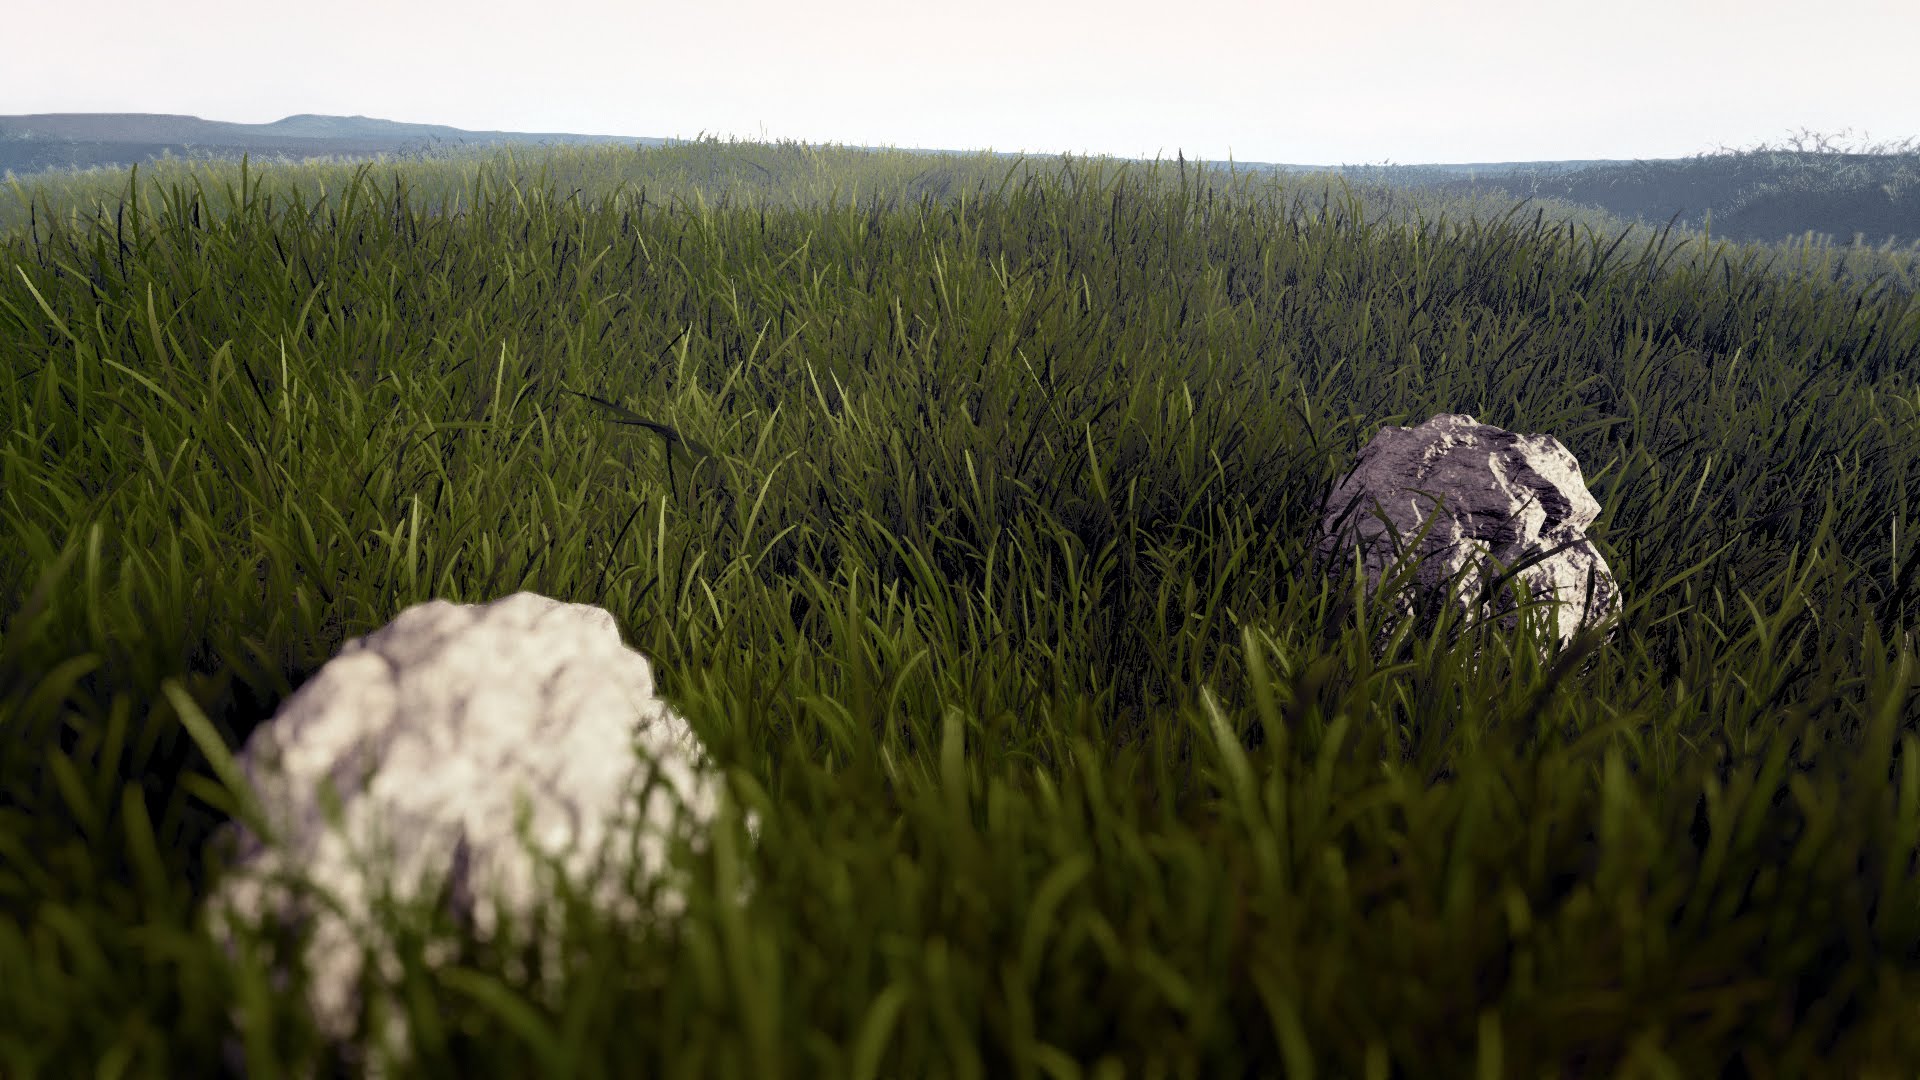 Dynamic Grass Shader (Unreal Engine 4) - YouTube